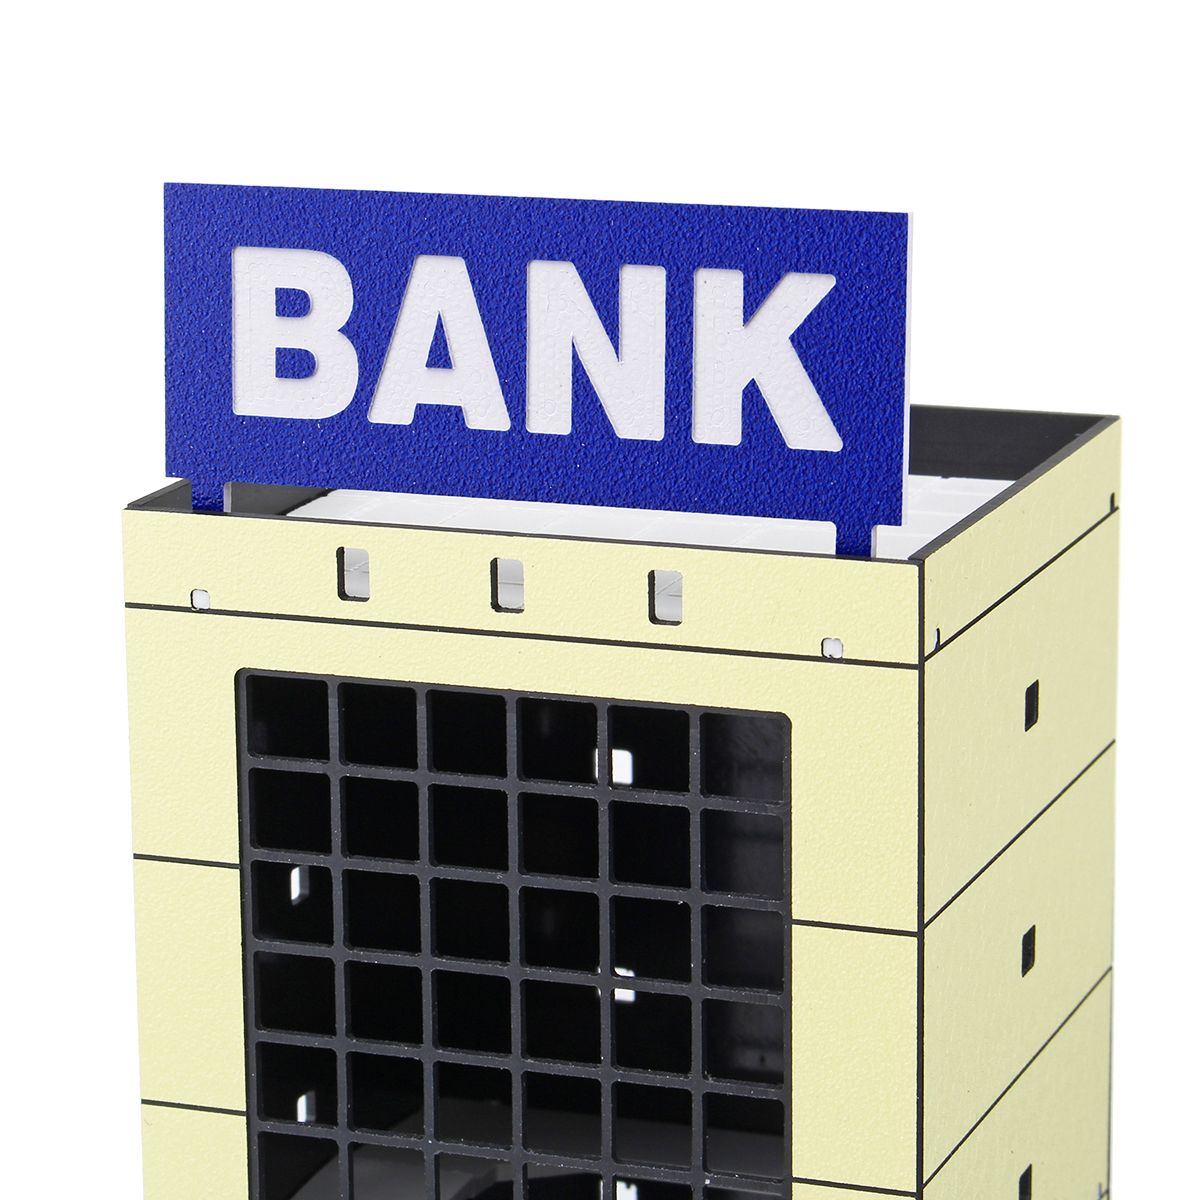 1150-Outland-Model-Modern-Building-Bank-N-Scale-FOR-GUNDAM-Gifts-1372826